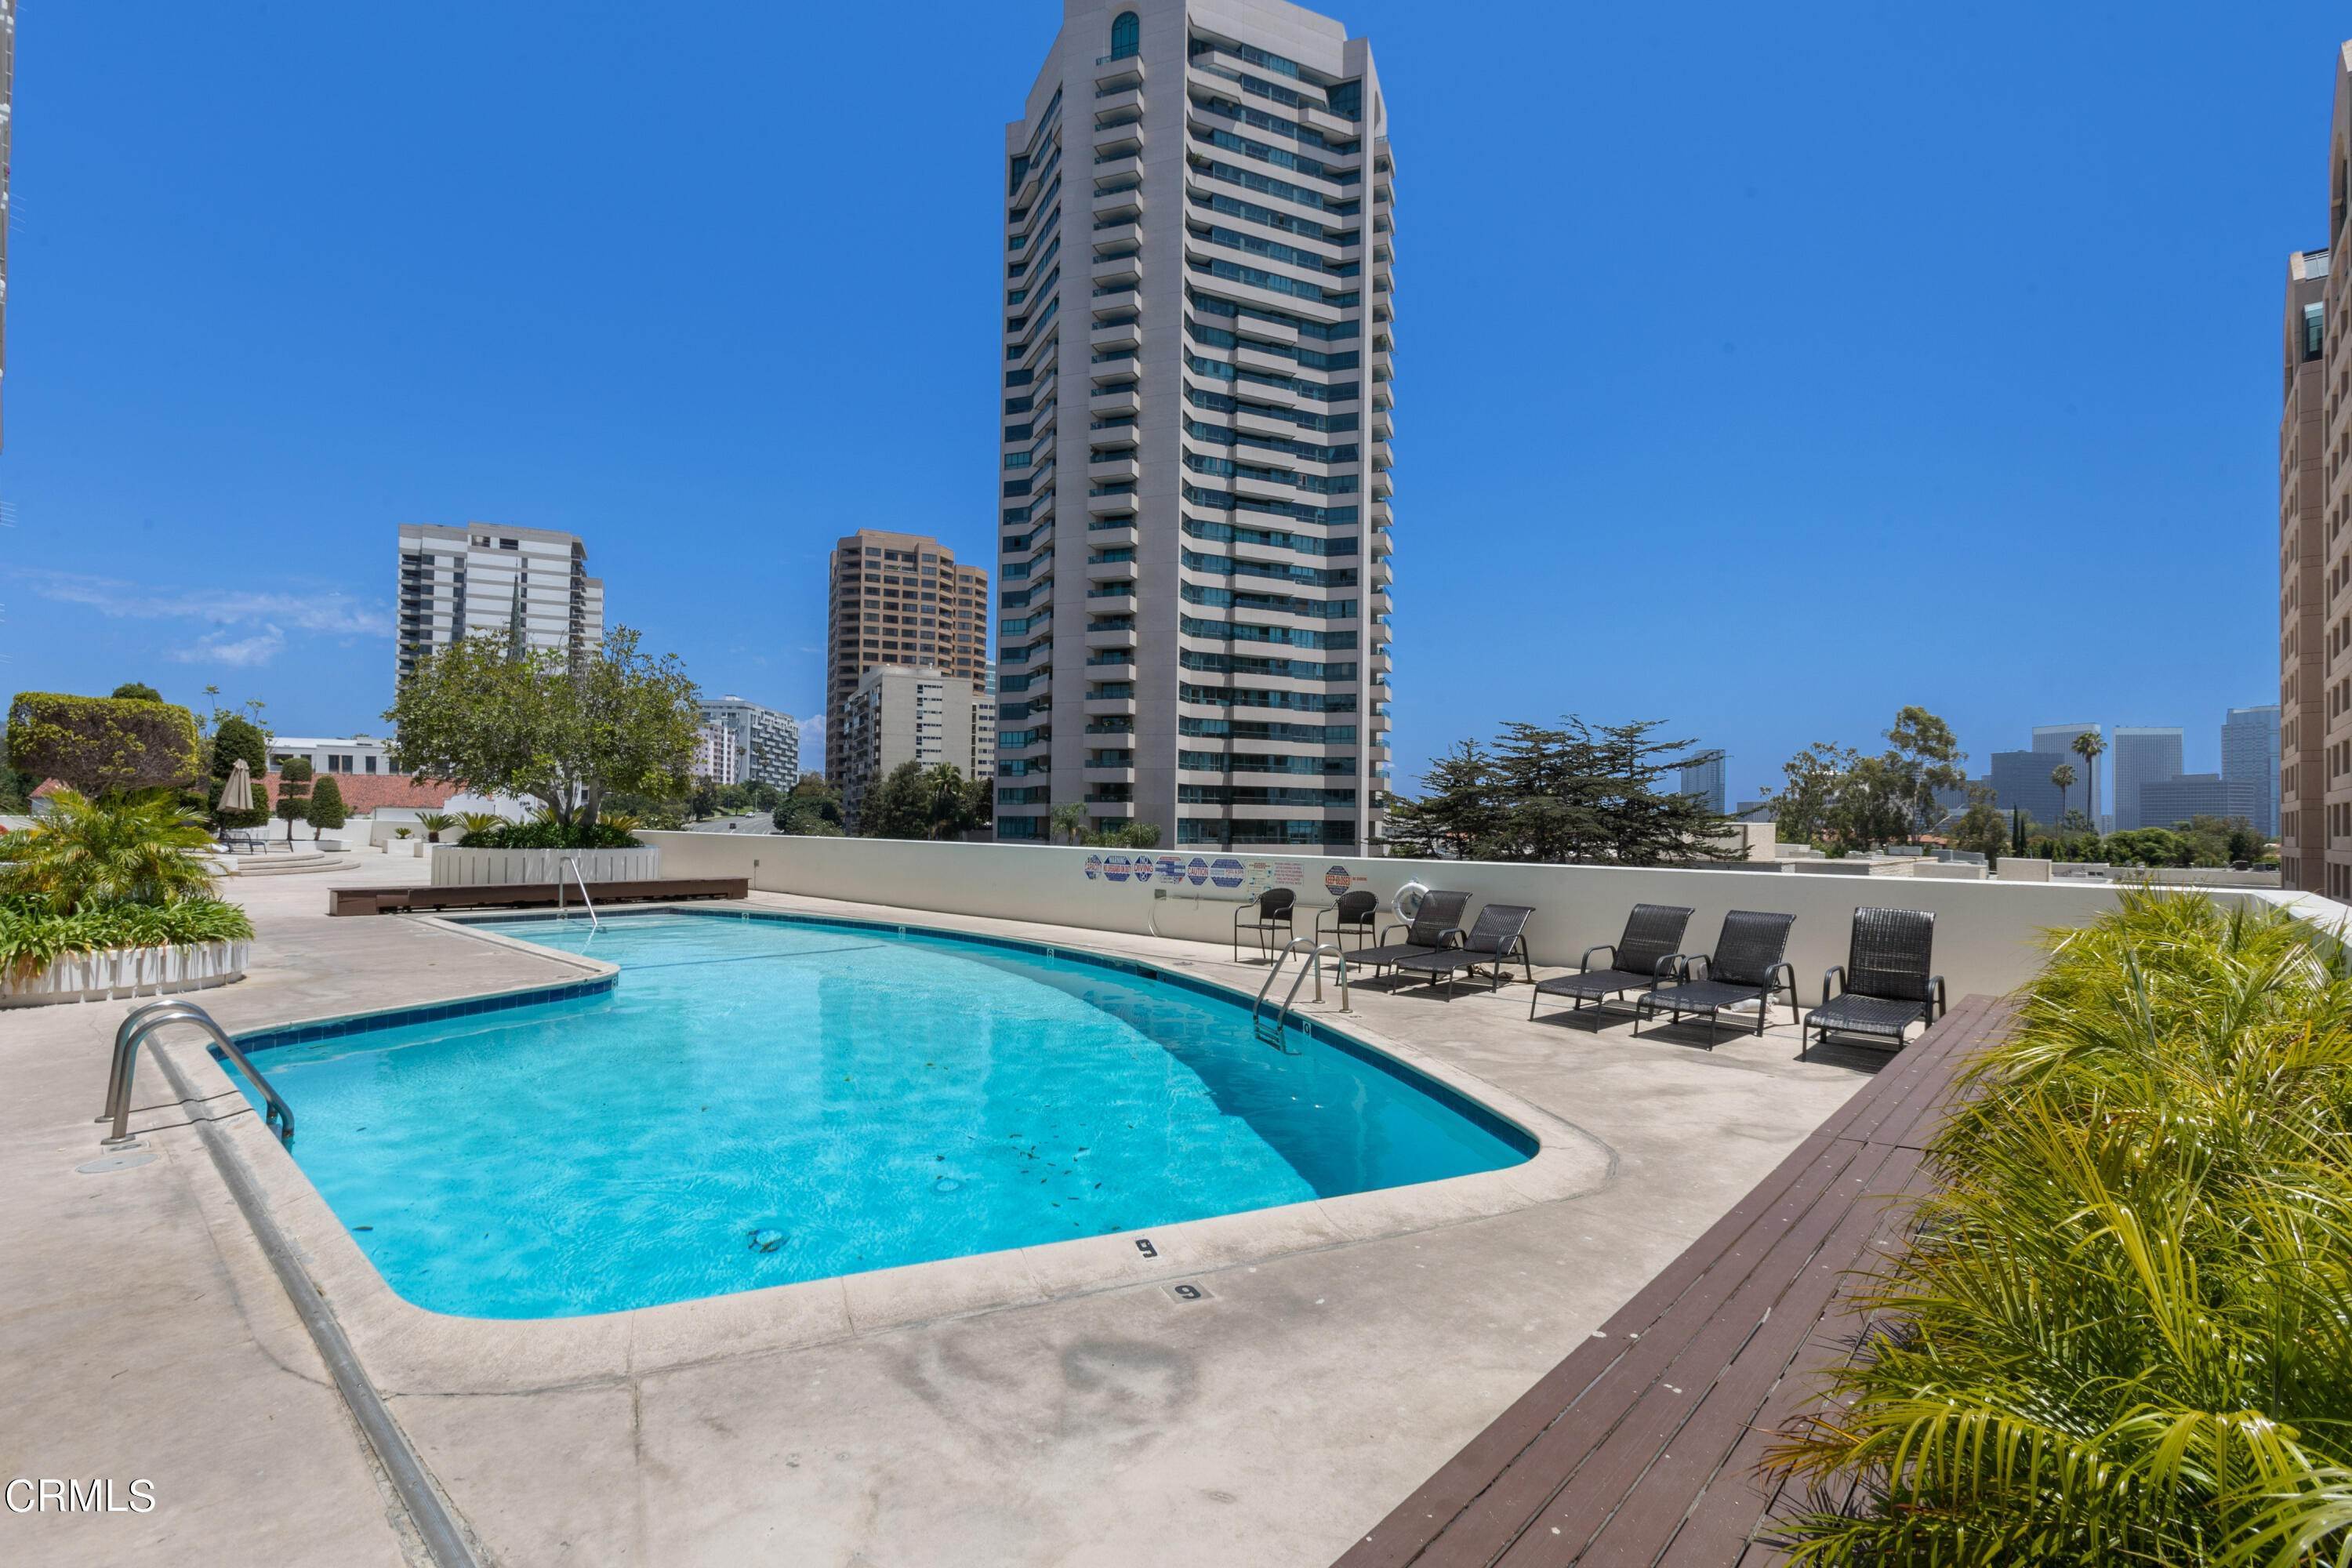 11. Condominiums for Sale at 10501 Wilshire Boulevard 1901 #1901 10501 Wilshire Boulevard 1901 Los Angeles, California 90024 United States